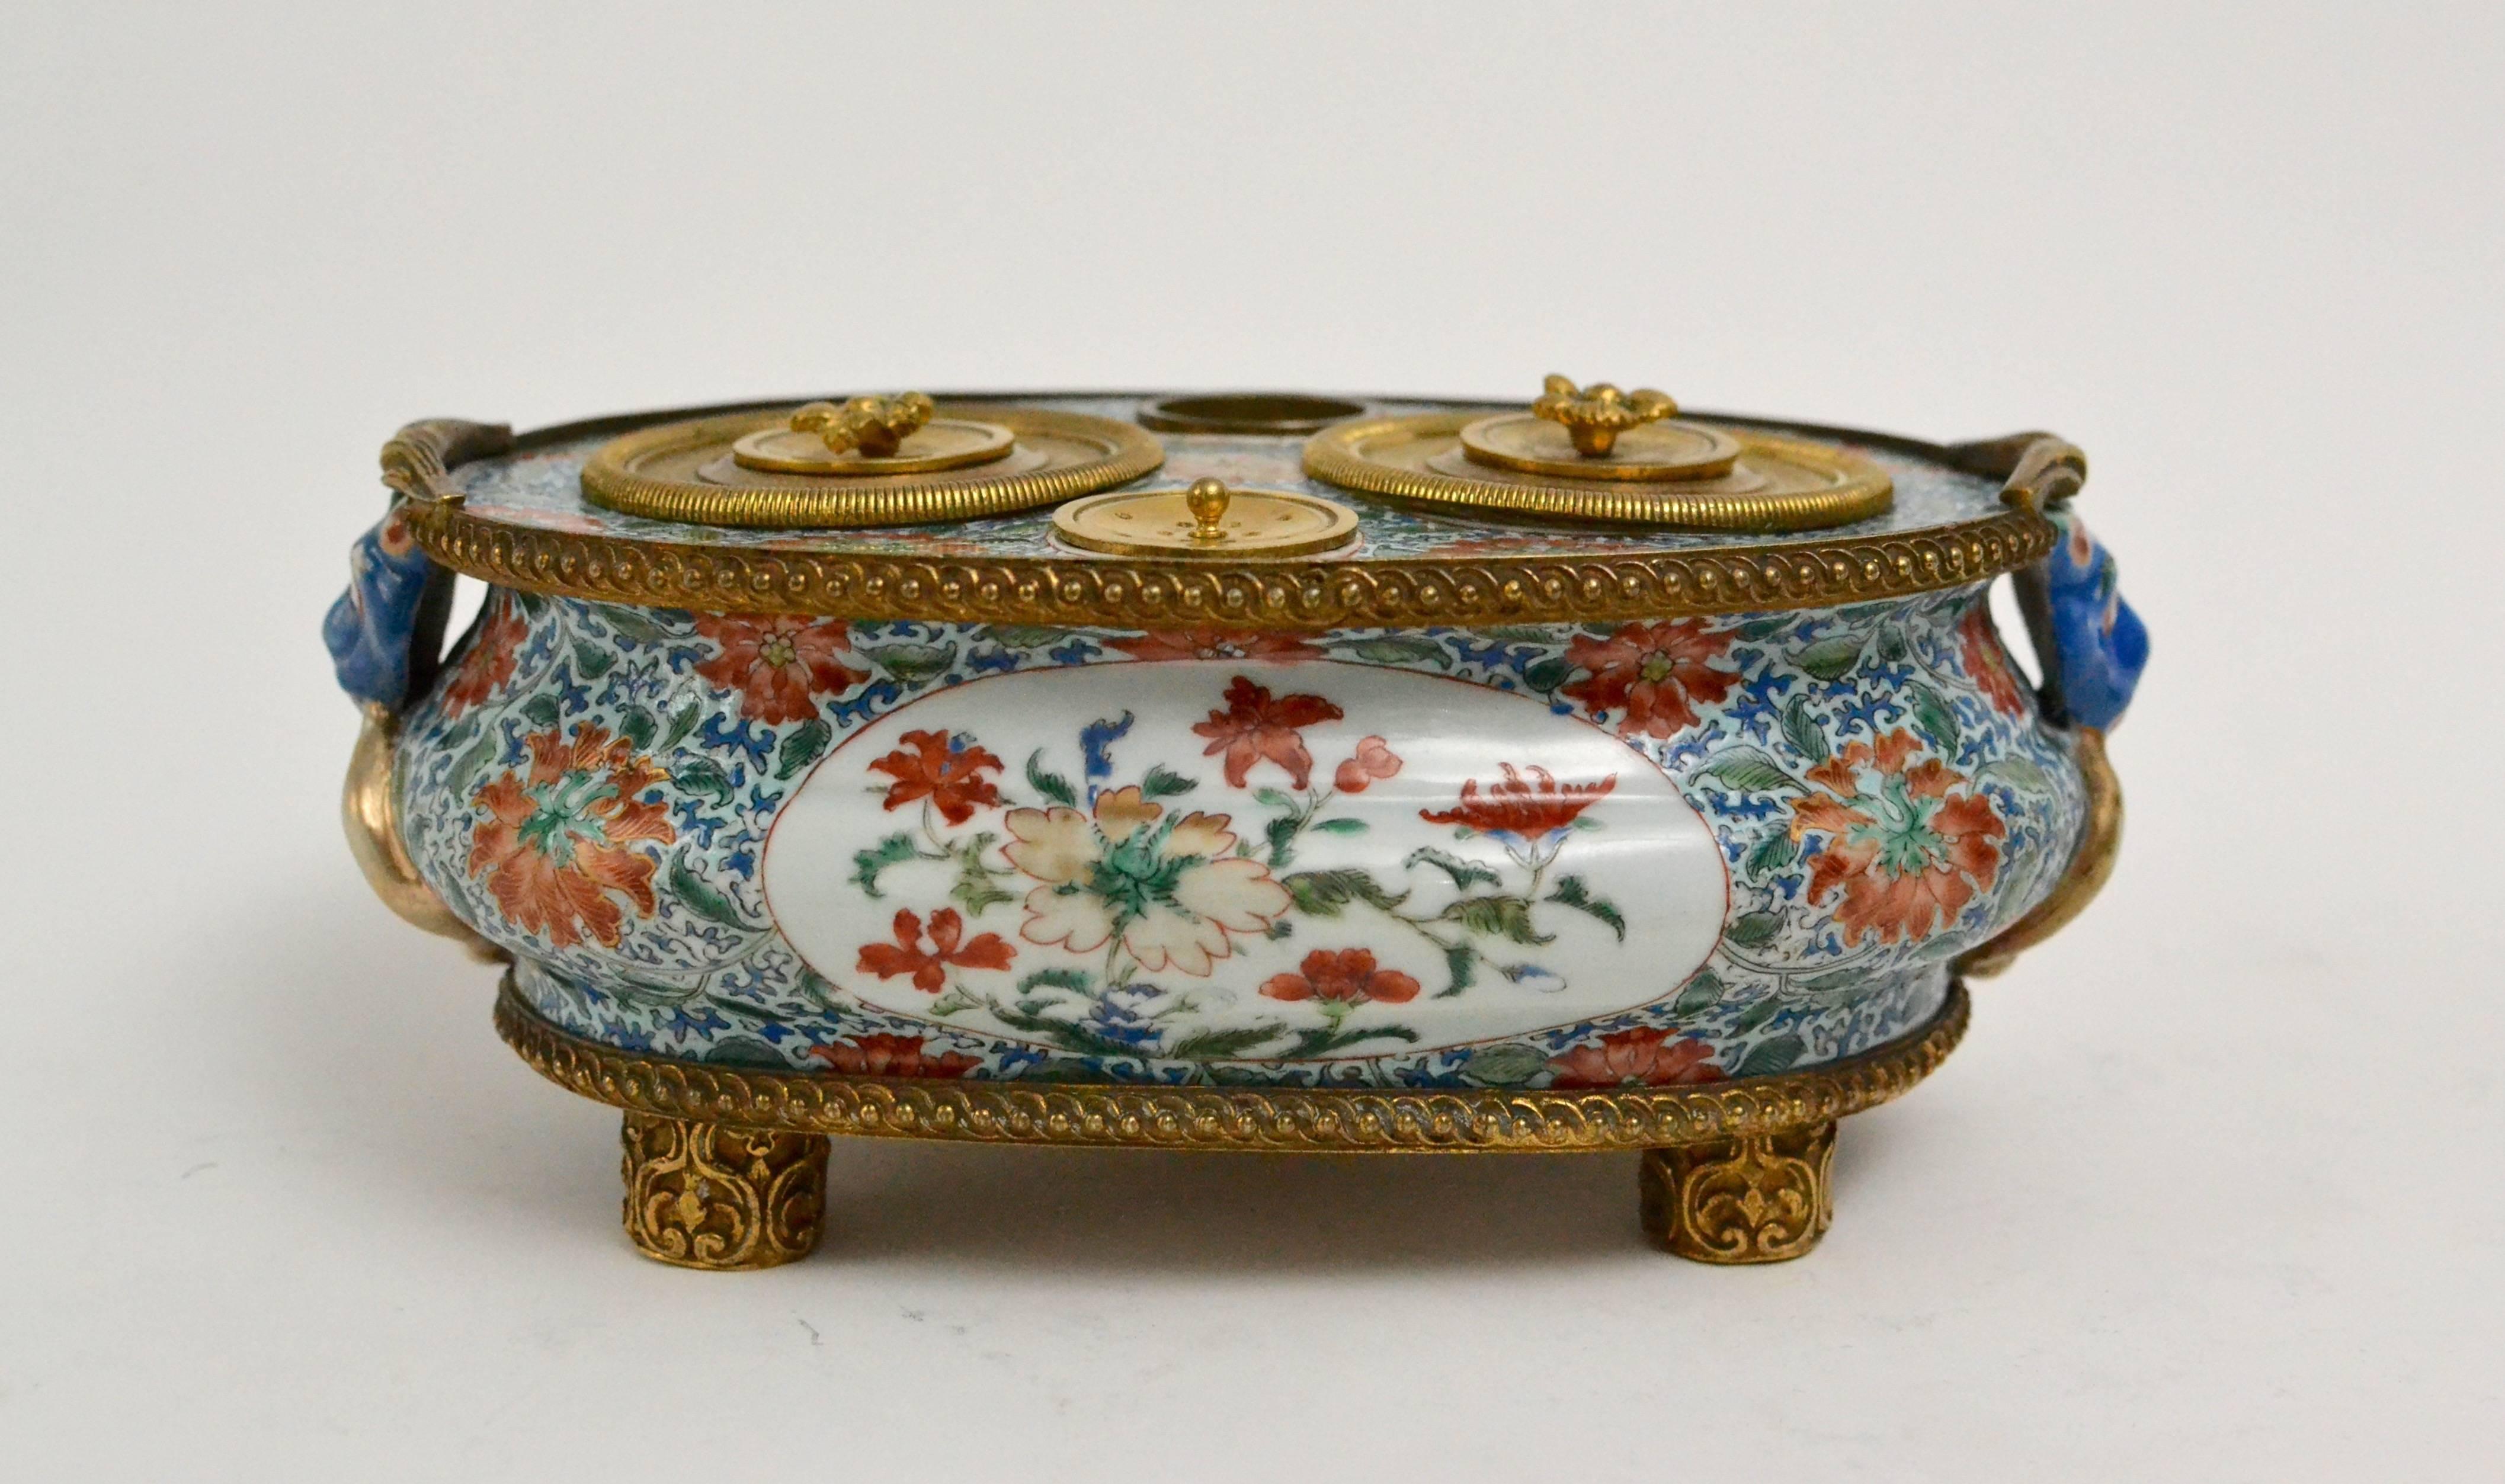 A Chinese 18th century ormolu-mounted famille verte inkstand.

A stand of this form with Spanish arms that can be dated precisely to 1742 is illustrated by A. Diez de Rivera, The Spanish Market, Oriental Art, vol. XLV, no 1, p 41.